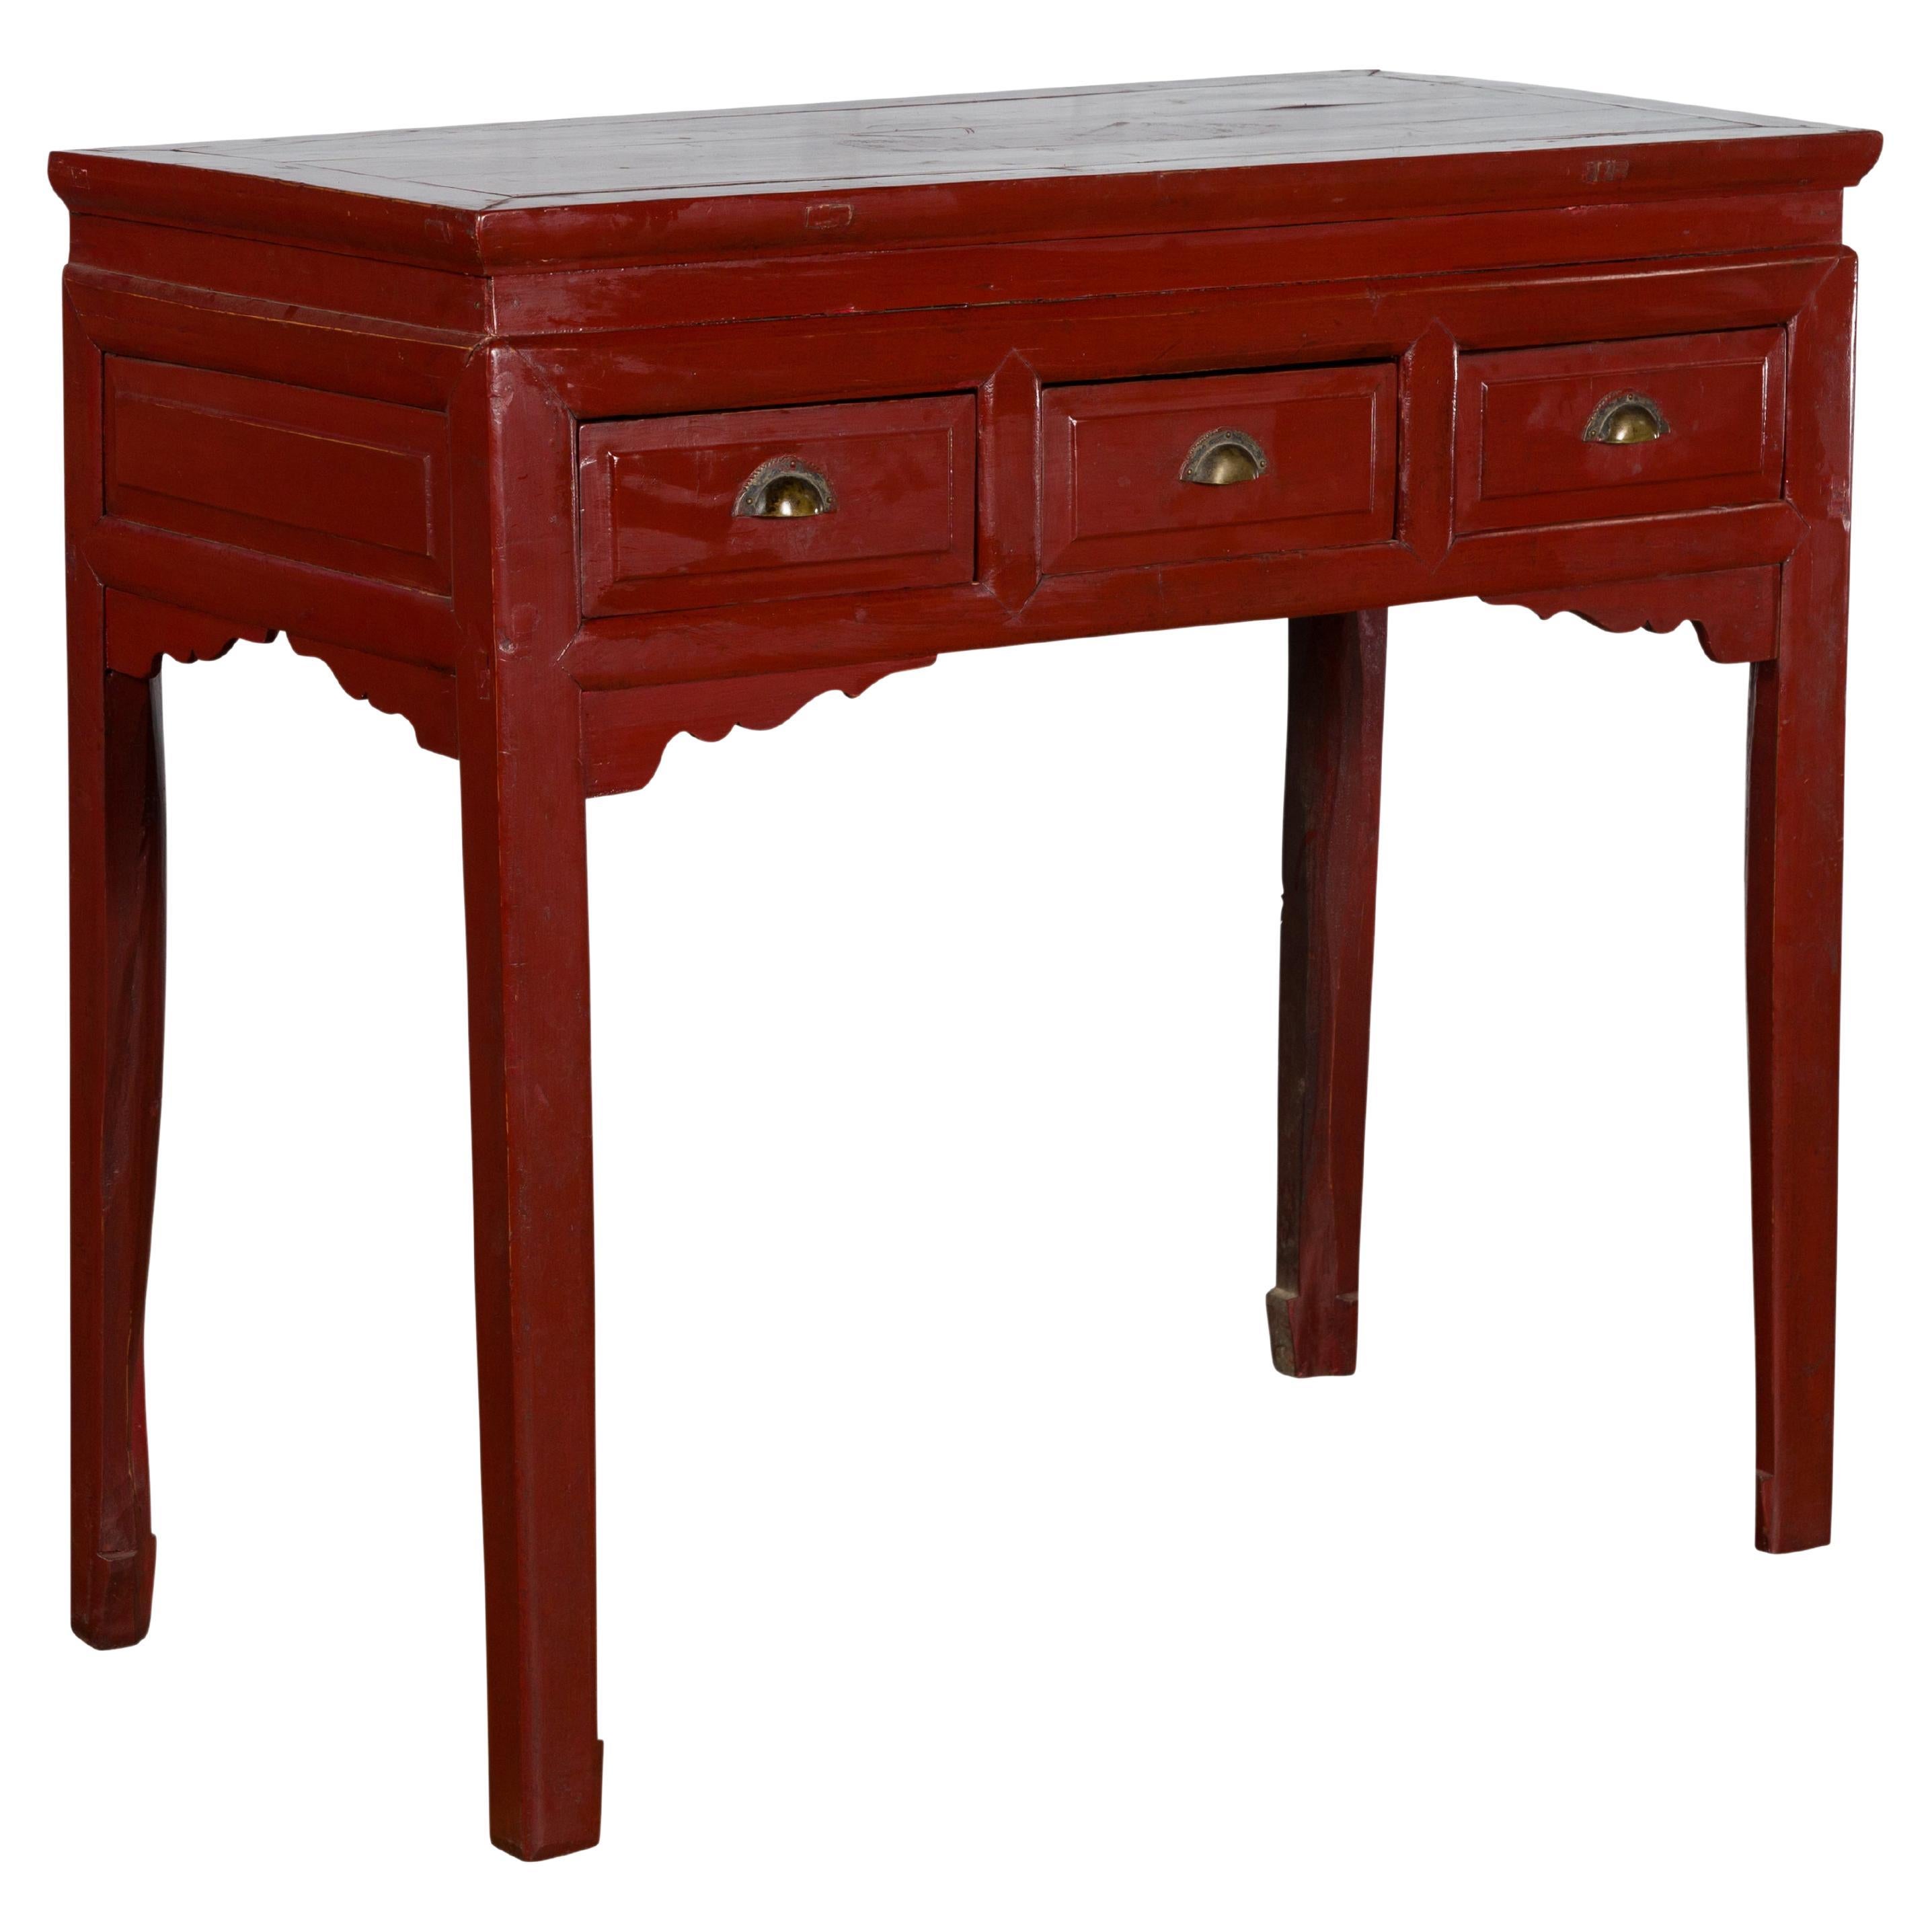 Chinese Vintage Red Lacquer Console Table with Drawers and Carved Spandrels For Sale